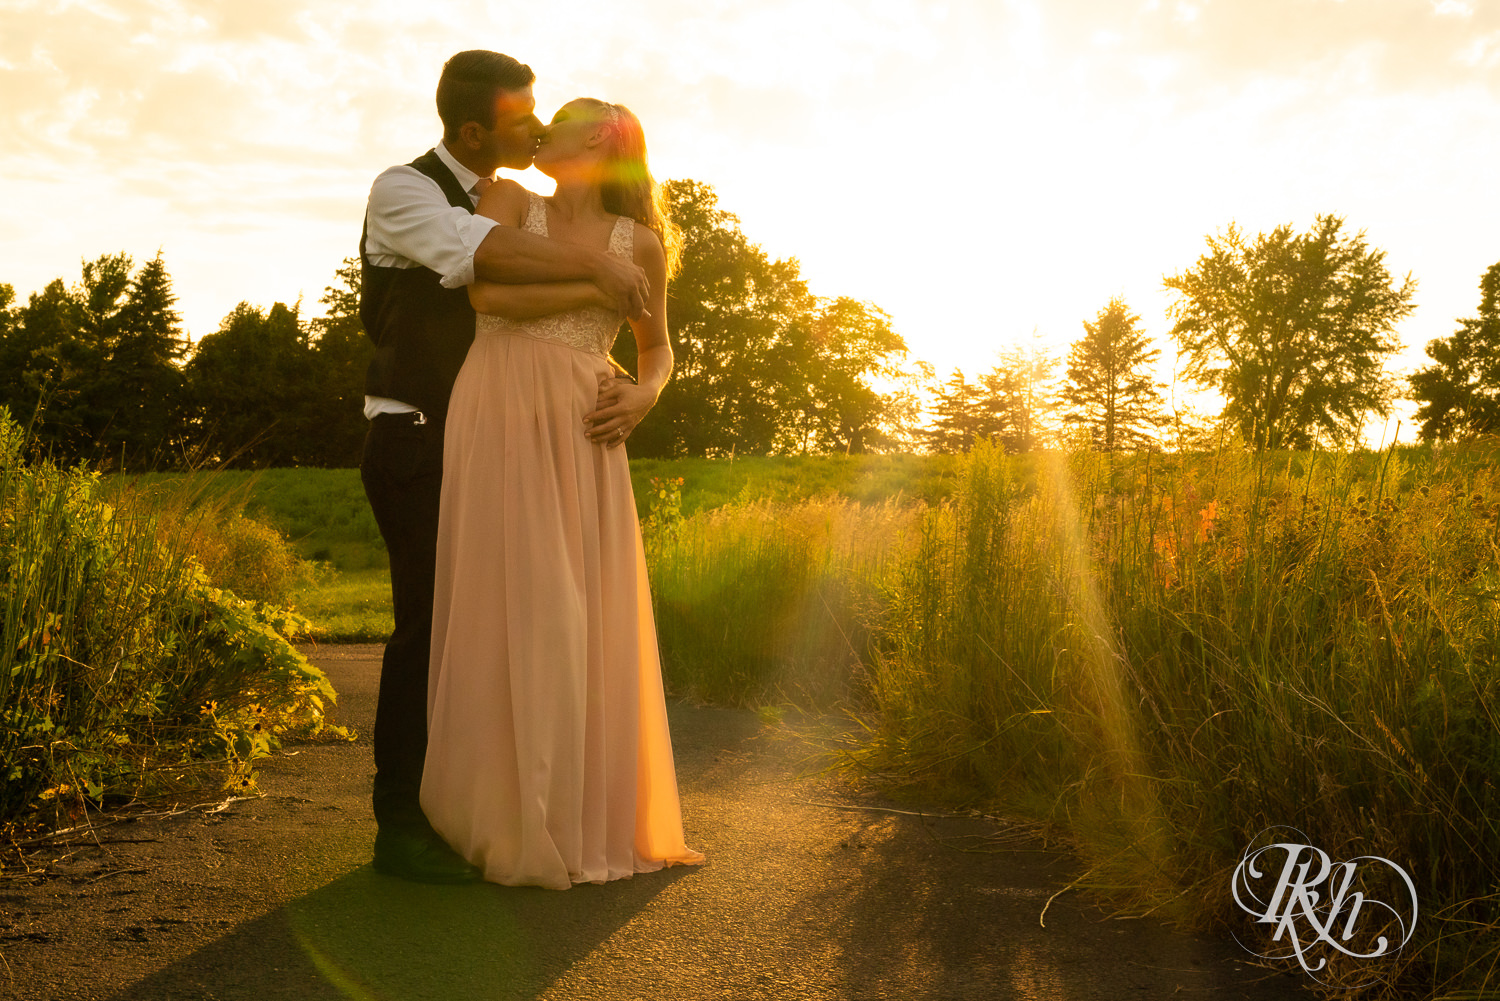 Bride and groom kissing at sunset at The Outpost Center in Chaska, Minnesota.